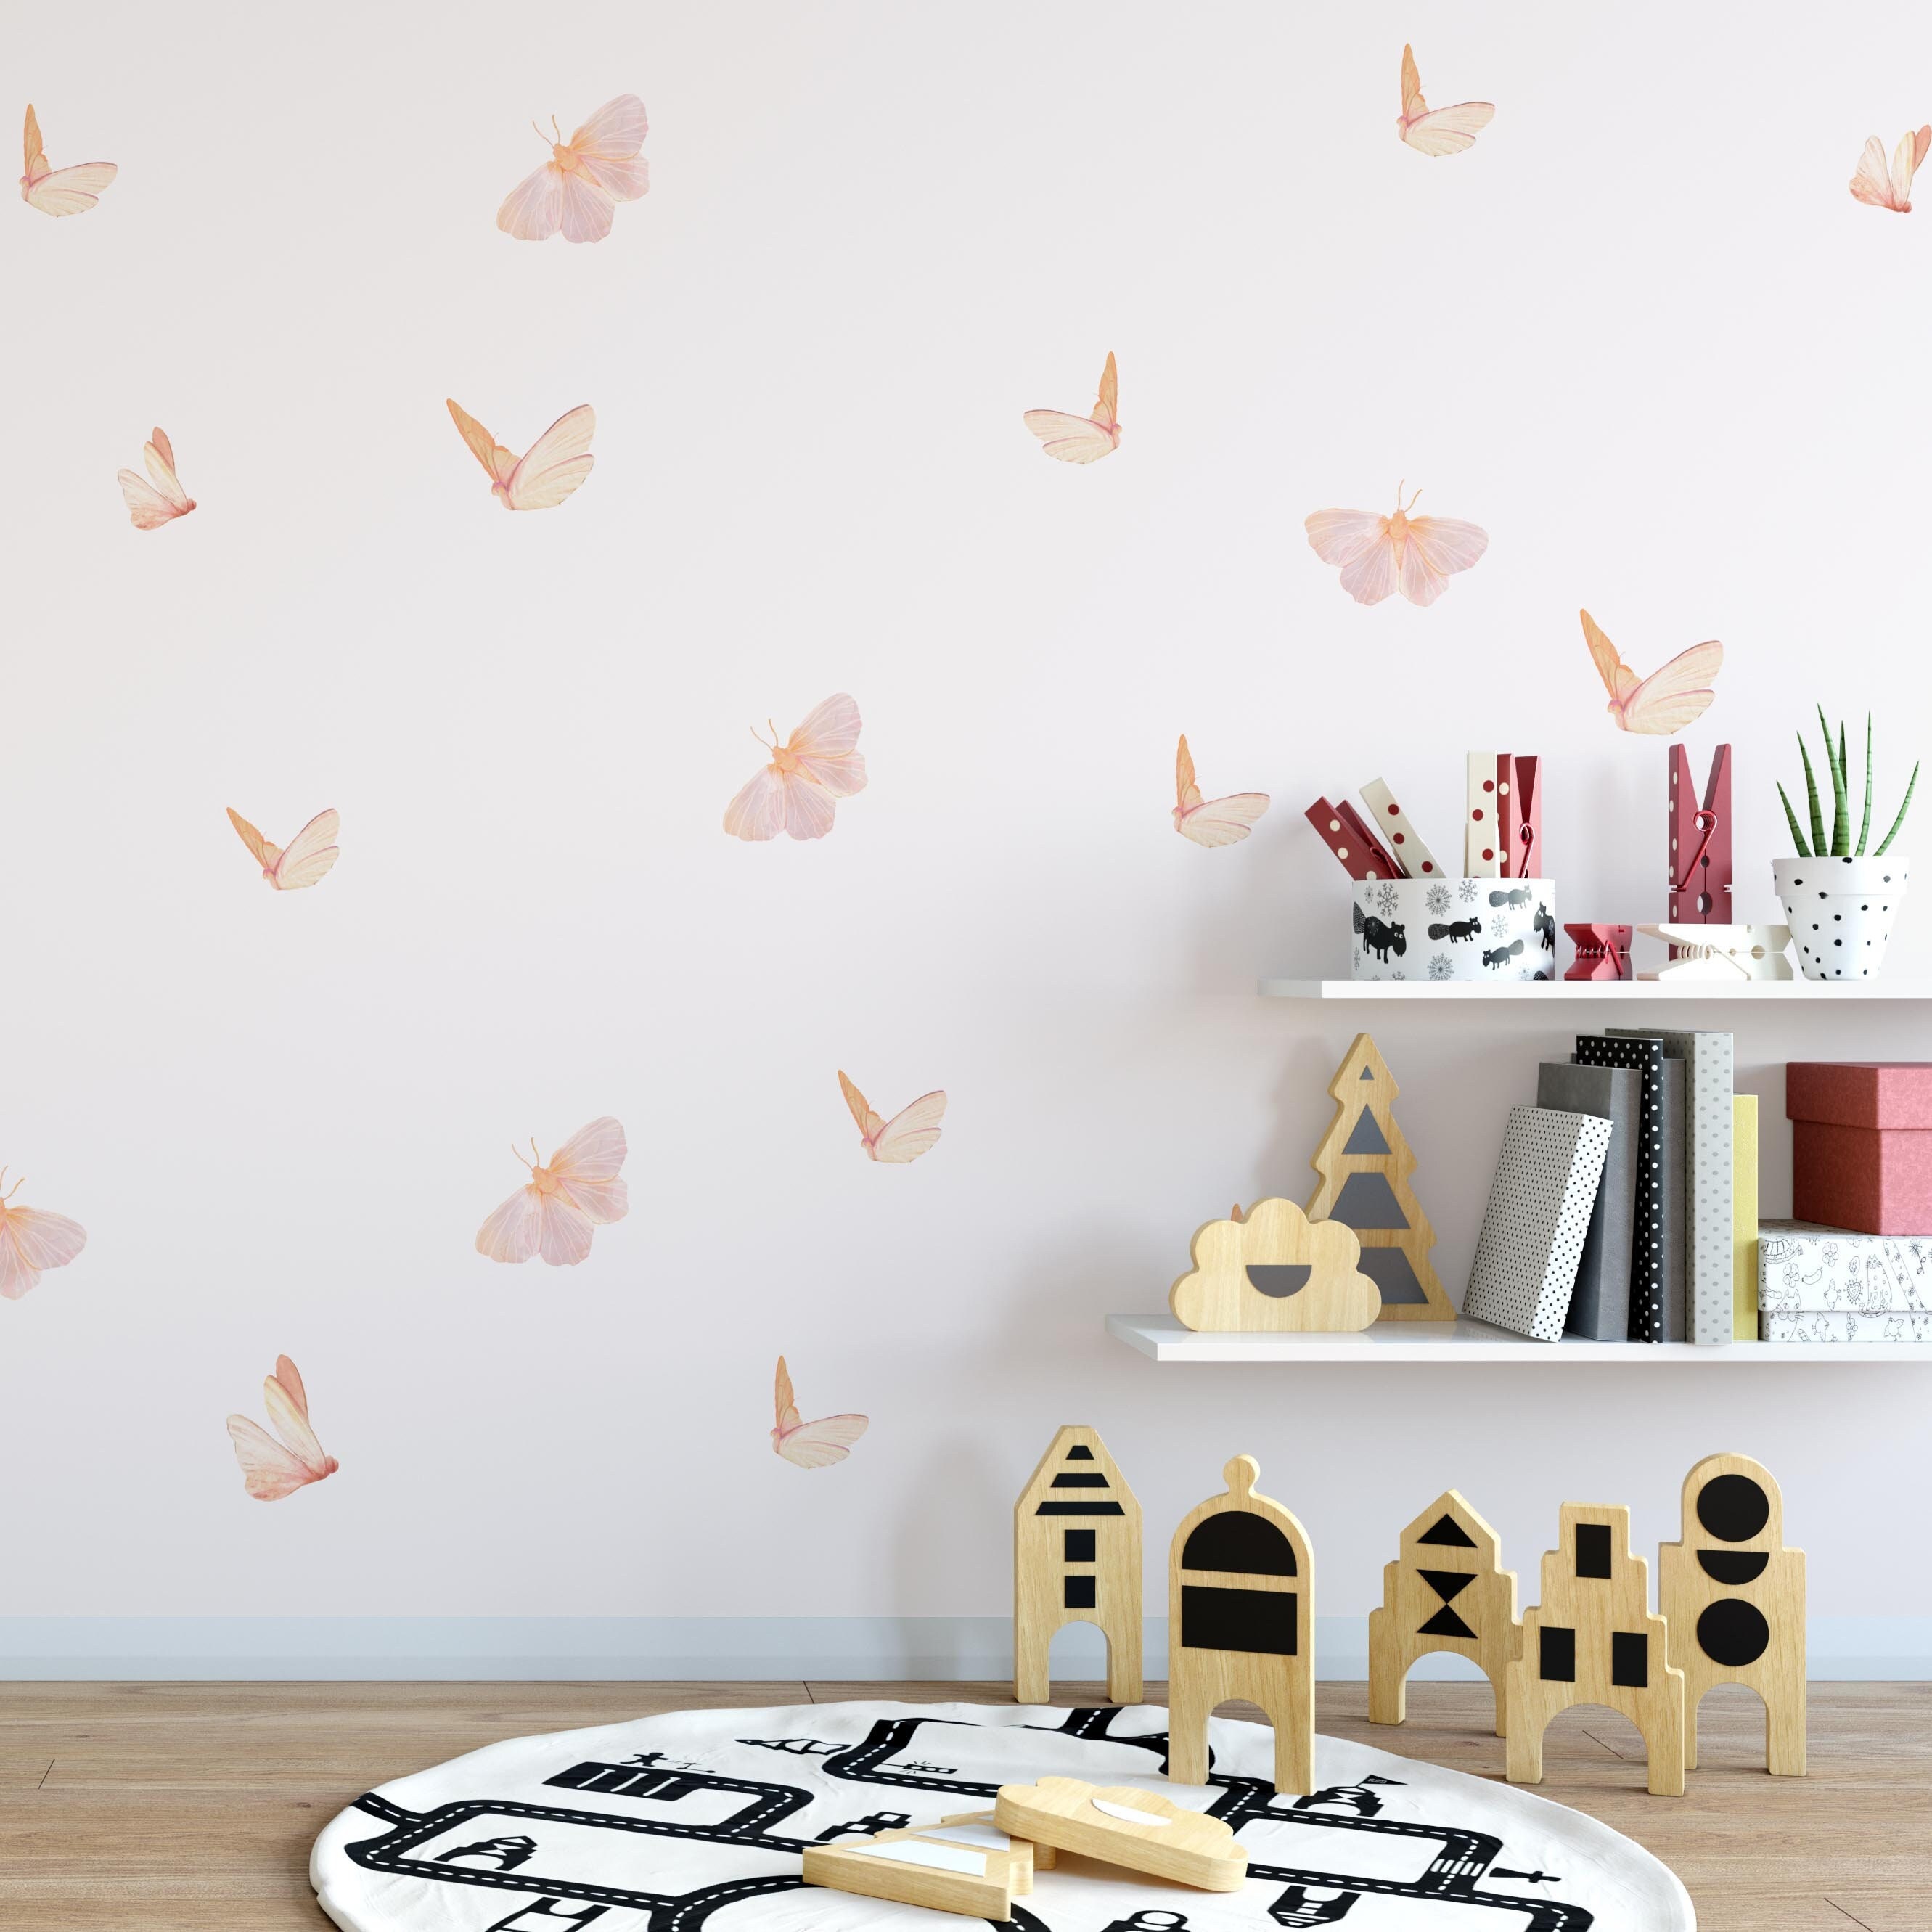 Butterflies Wall Decal, Butterfly Wall Decal, Butterflies Wall Sticker,  Butterfly Nursery Decor, Butterflies Baby Girls Room Wall Decals 